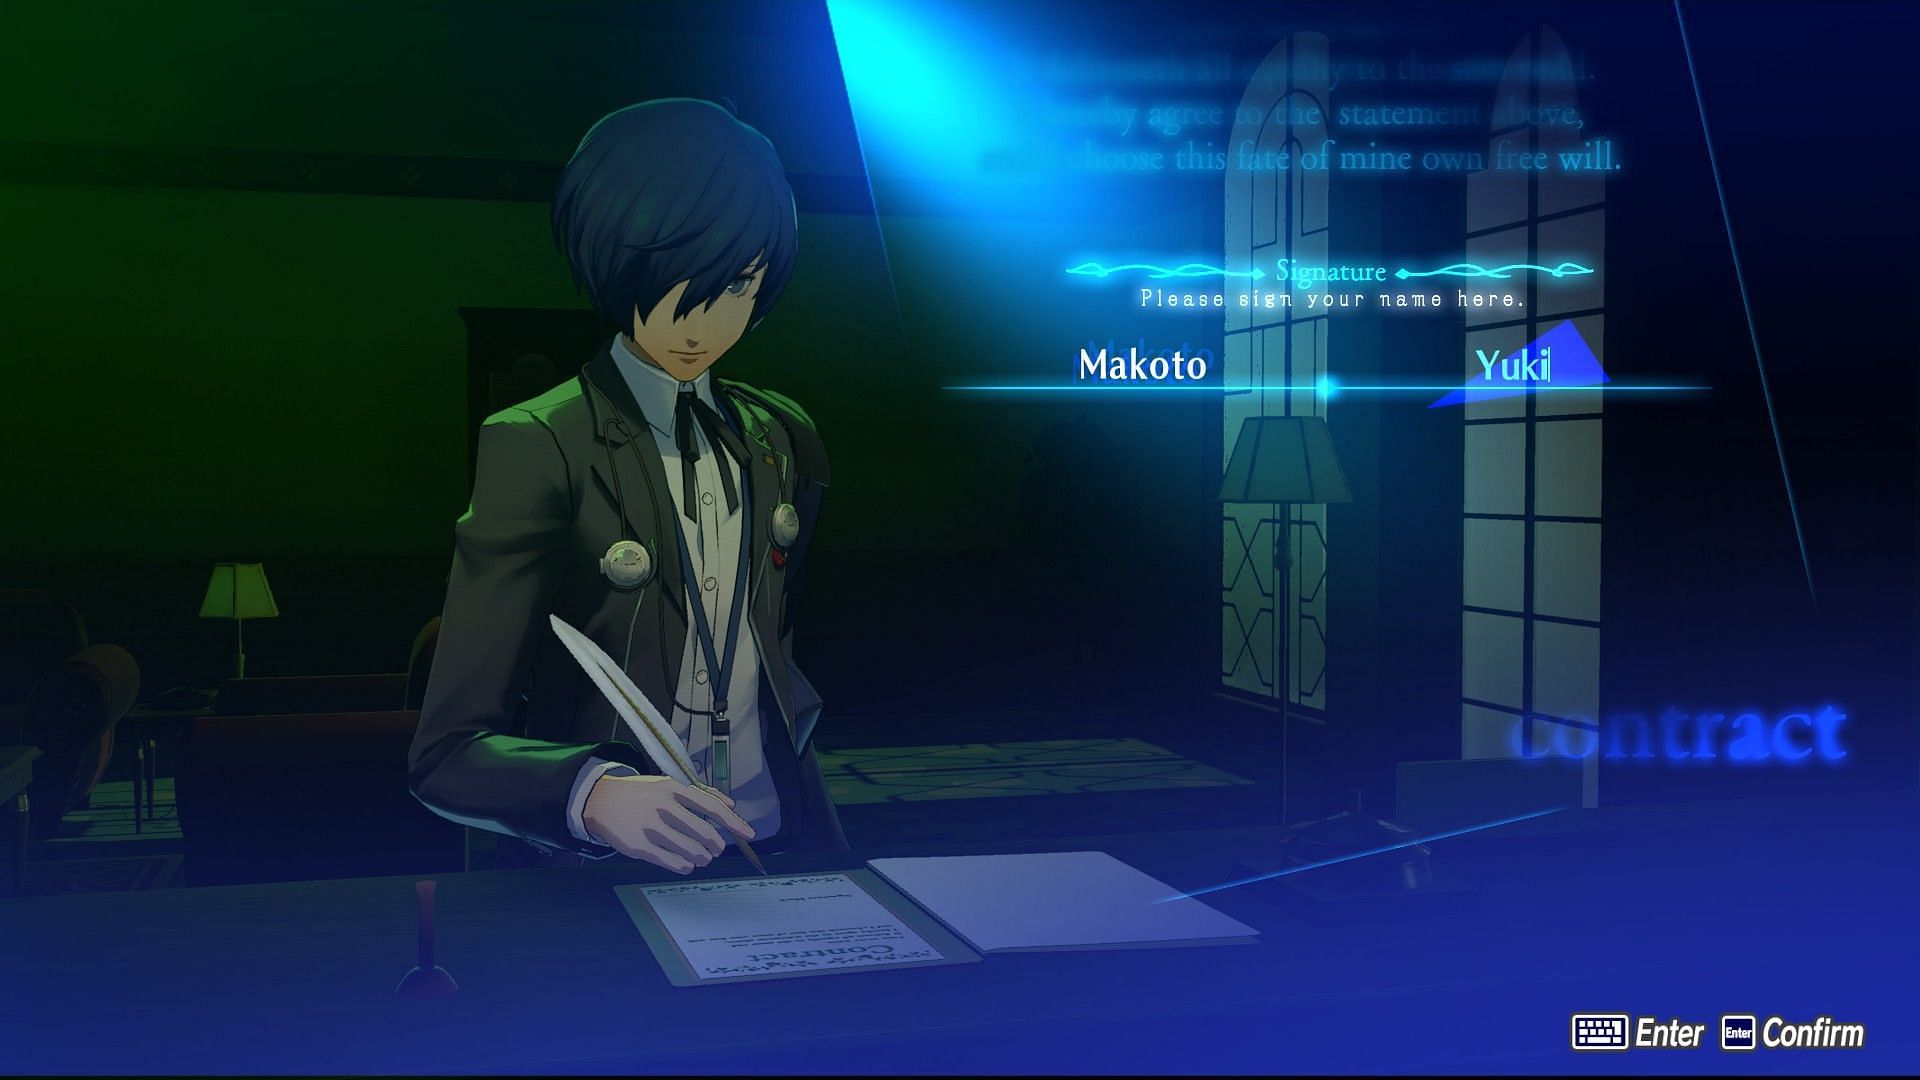 The contract has been signed. You are in control of your destiny (Image via Atlus) s)